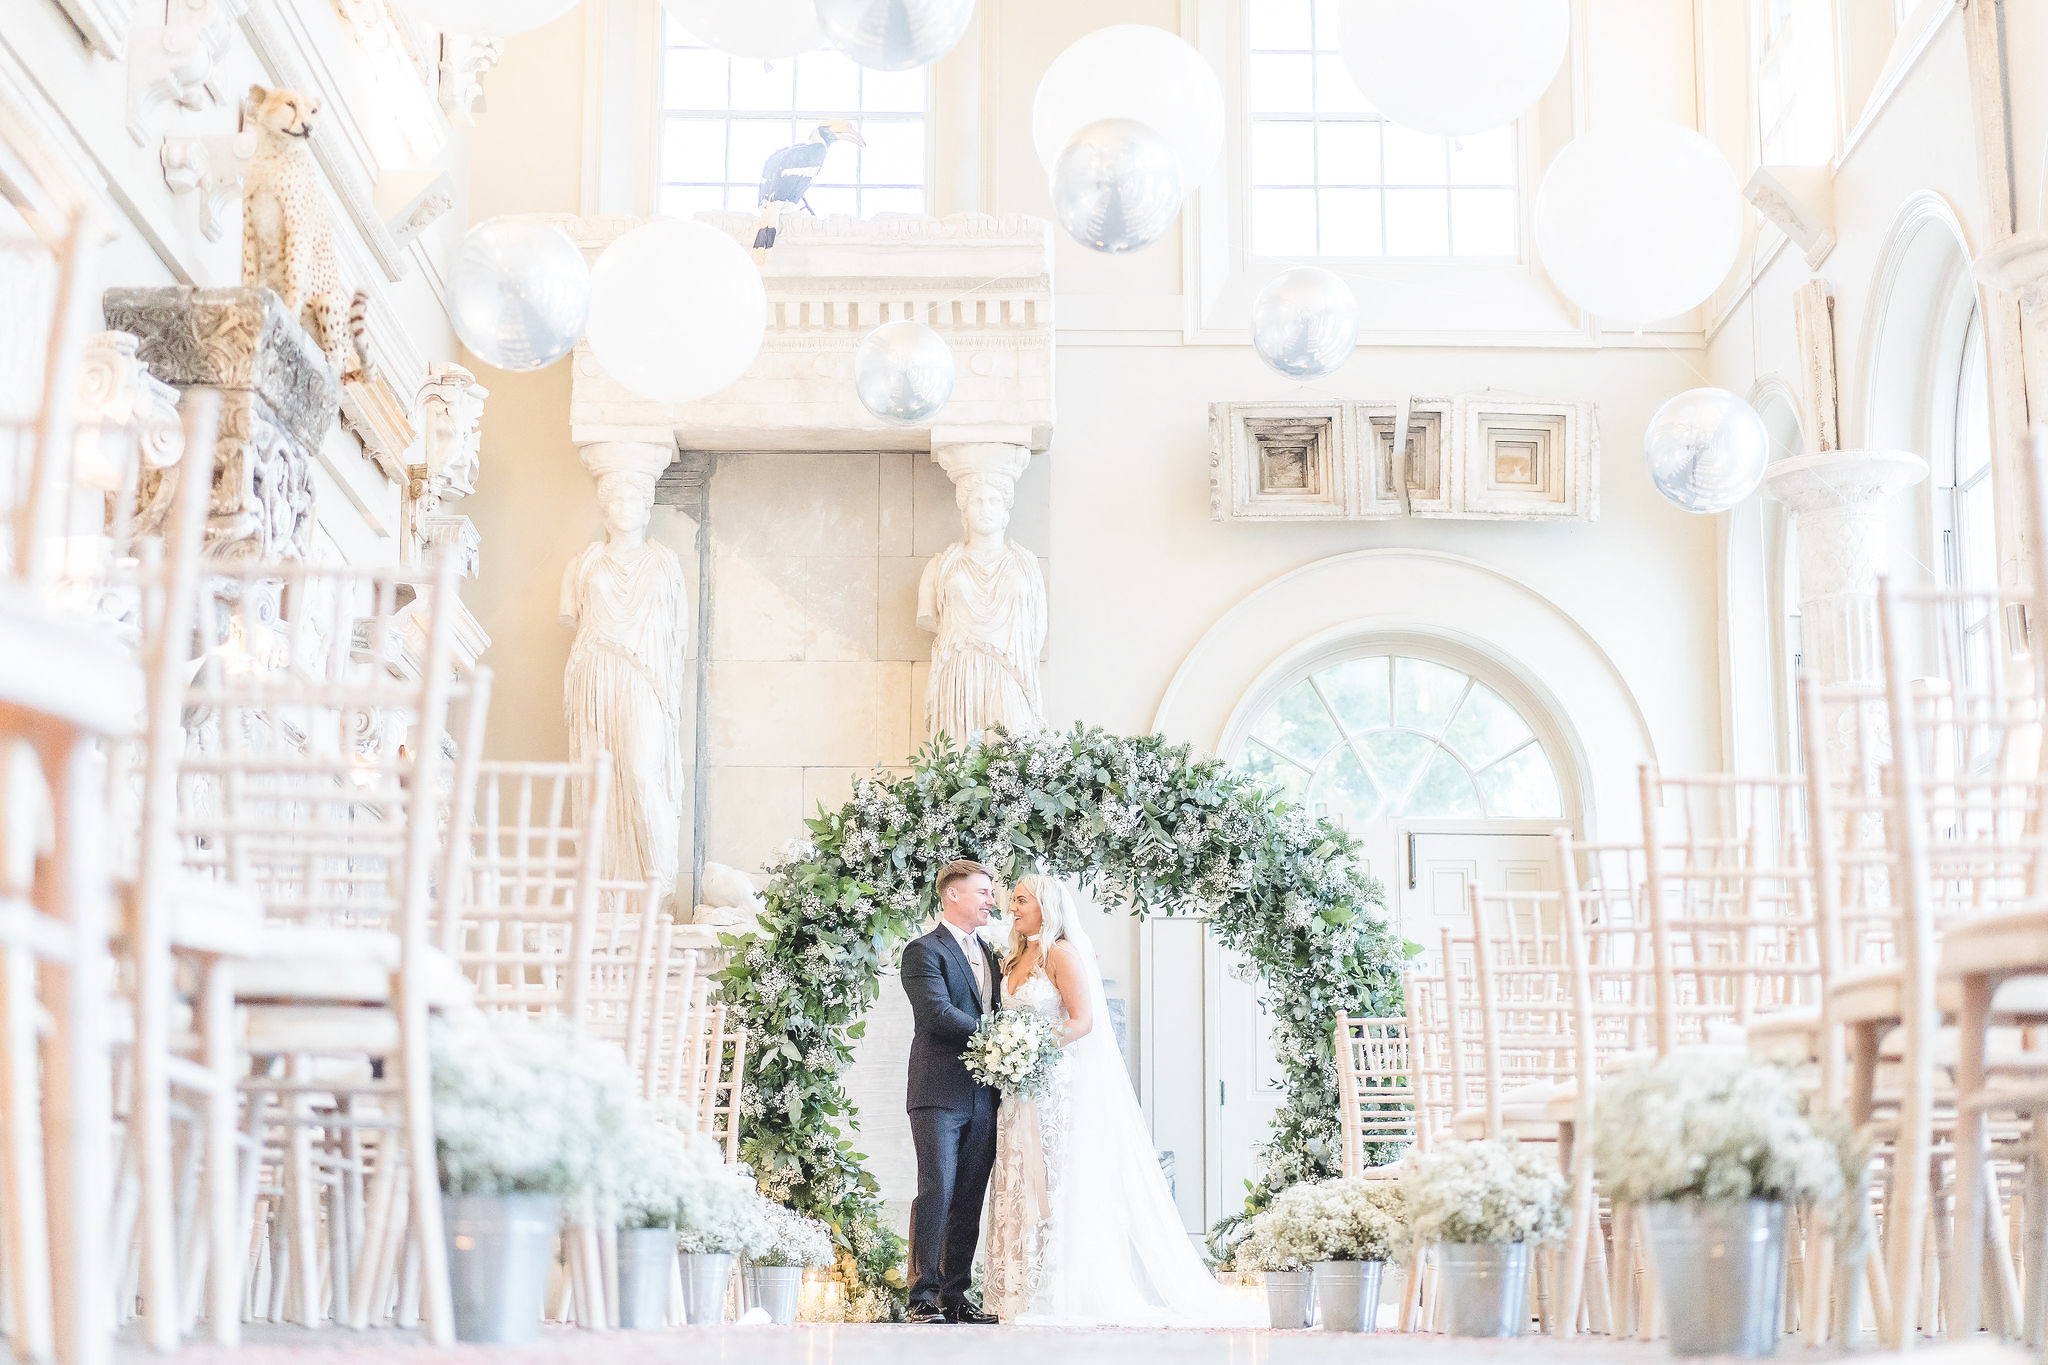 Light and airy weddings at Aynhoe Park